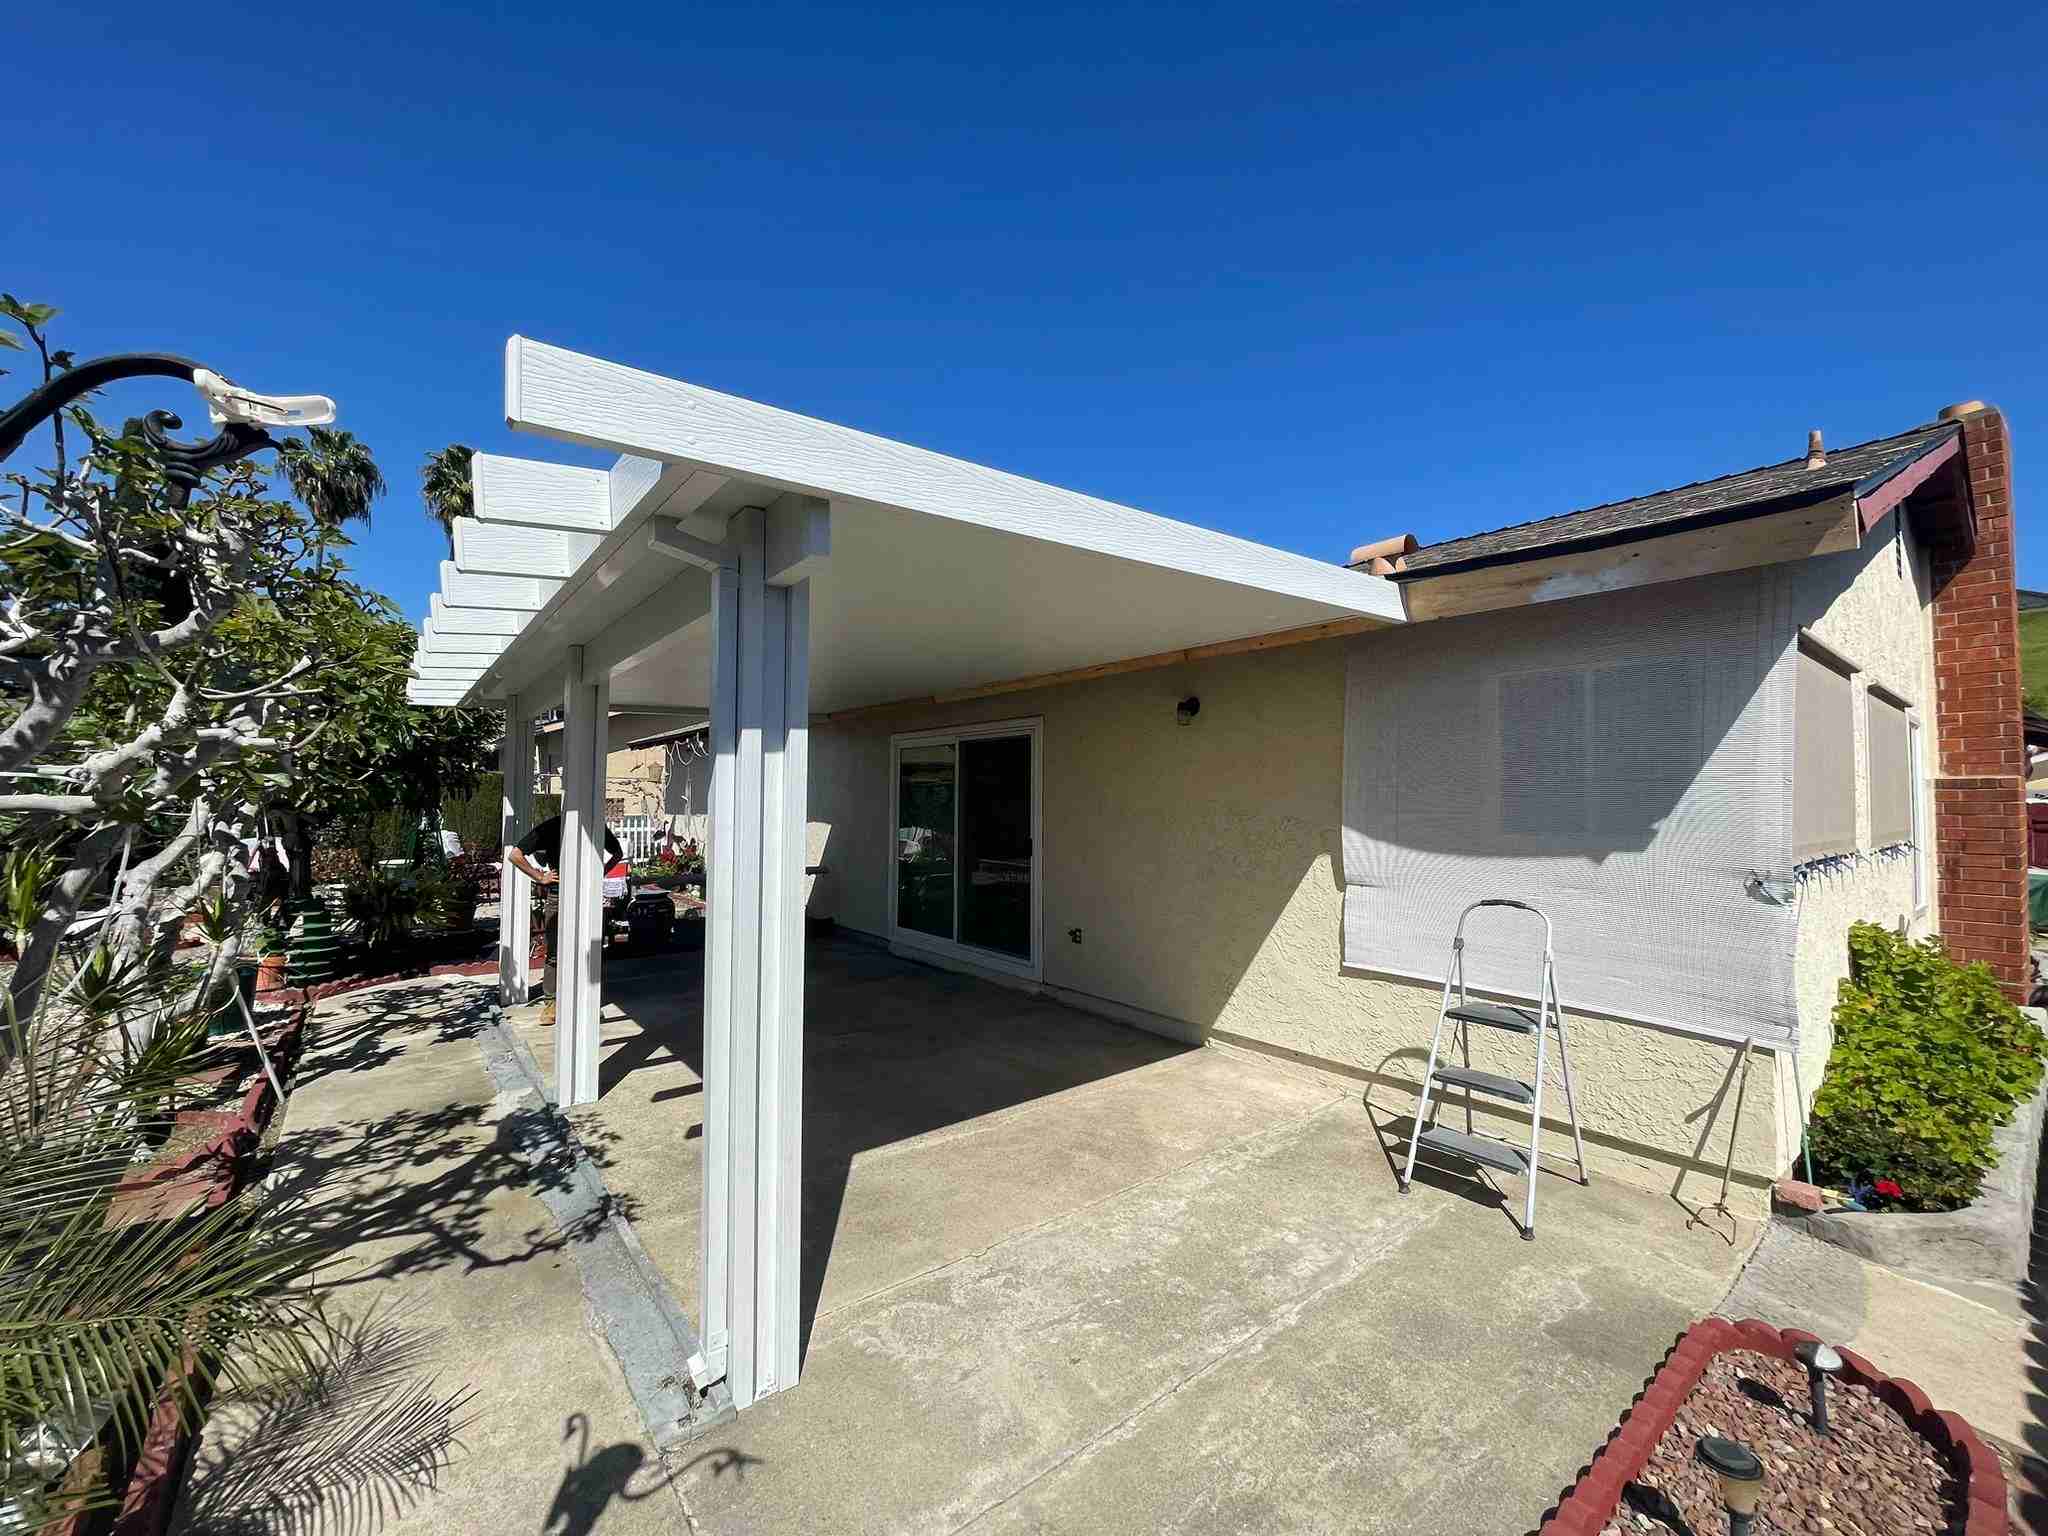 Patio Cover Installation in San Diego, CA